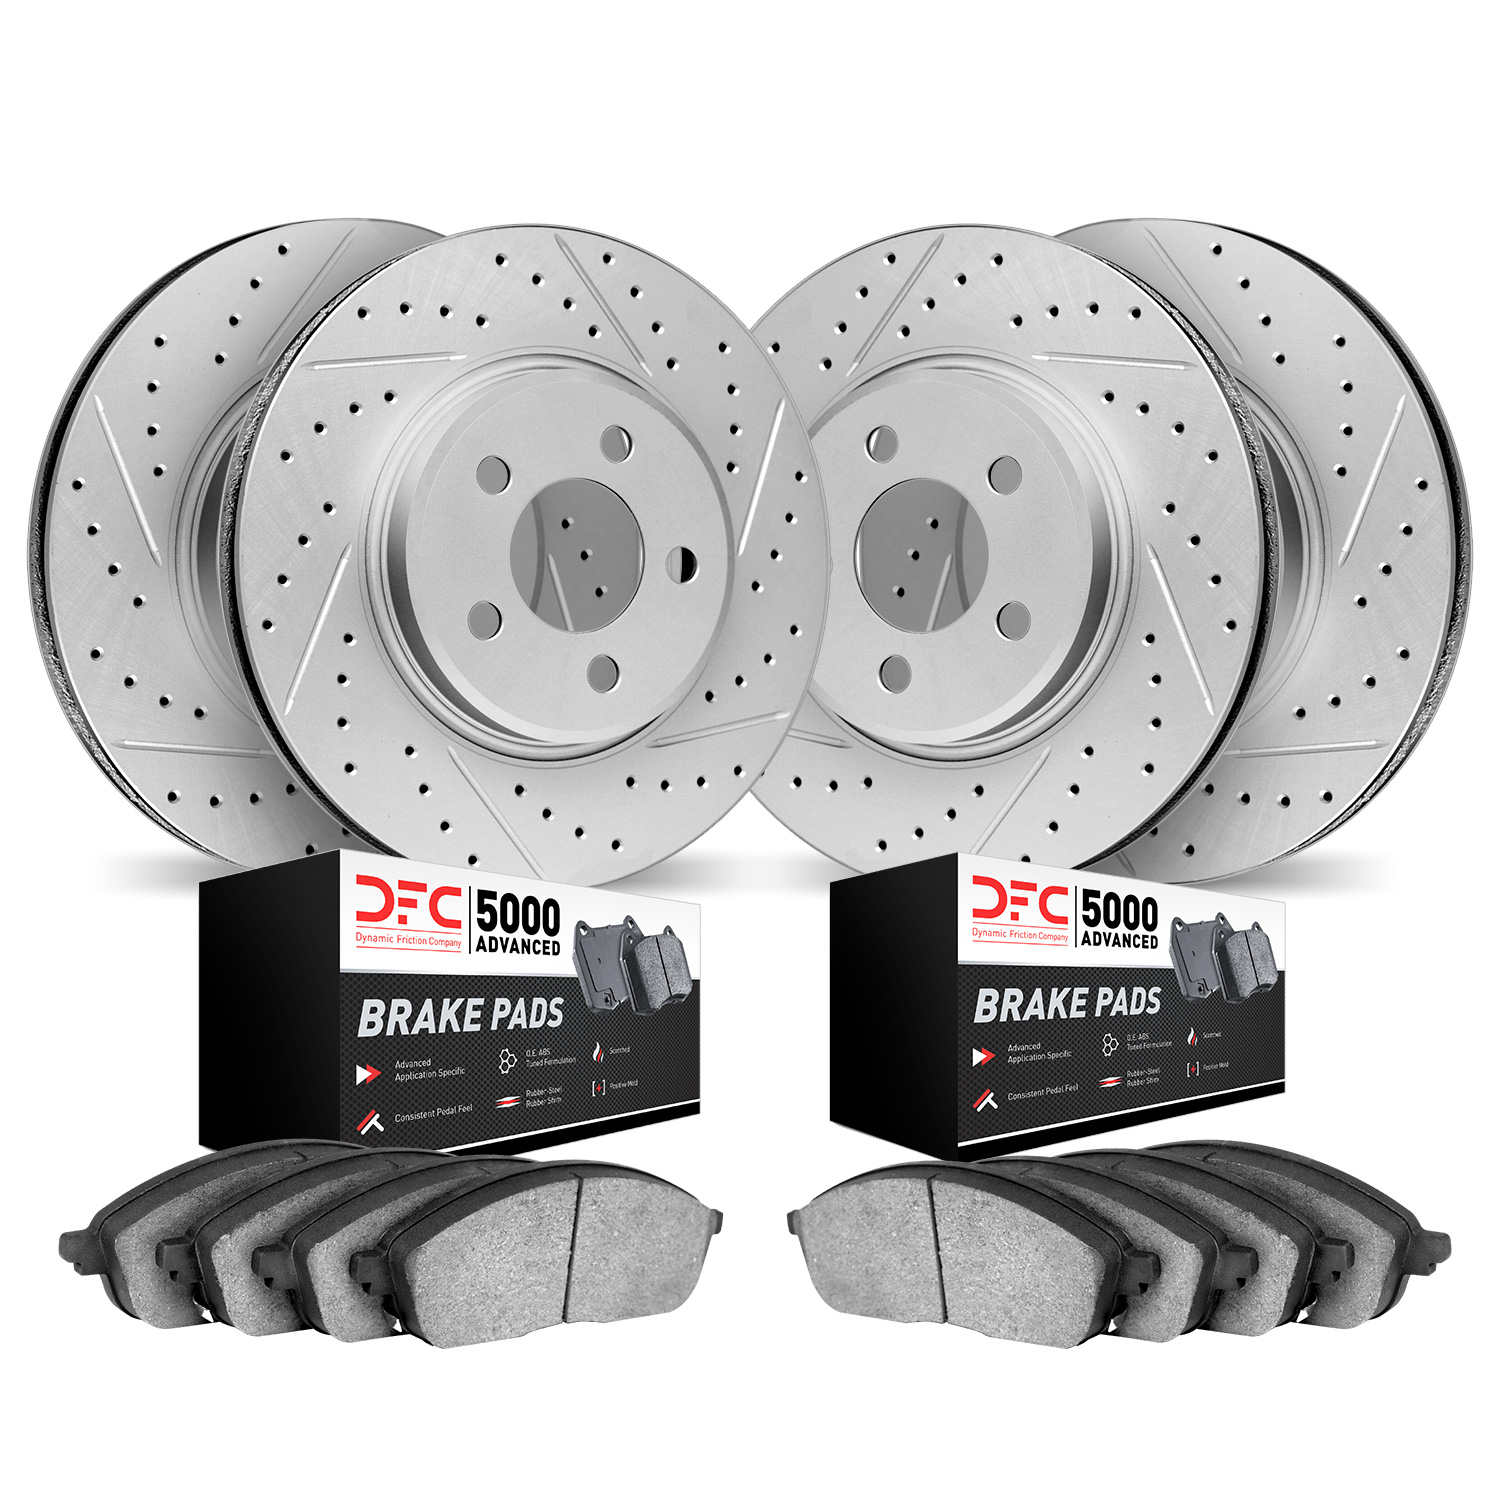 2504-31043 Geoperformance Drilled/Slotted Rotors w/5000 Advanced Brake Pads Kit, 2017-2019 BMW, Position: Front and Rear